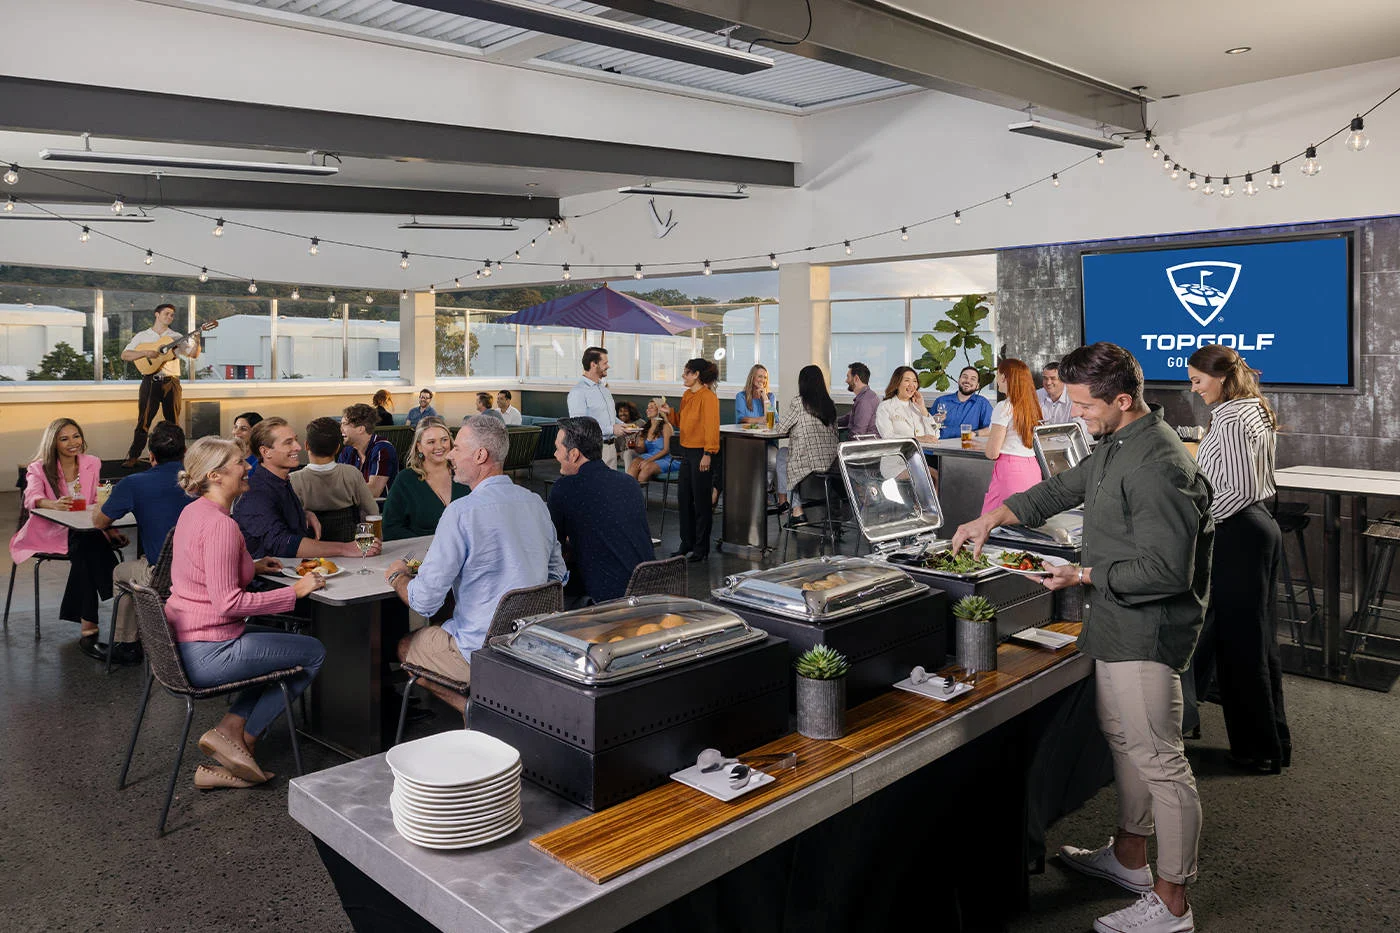 A group of people sharing delicious food and listening to live music at an event hosted at Topgolf Gold Coast.